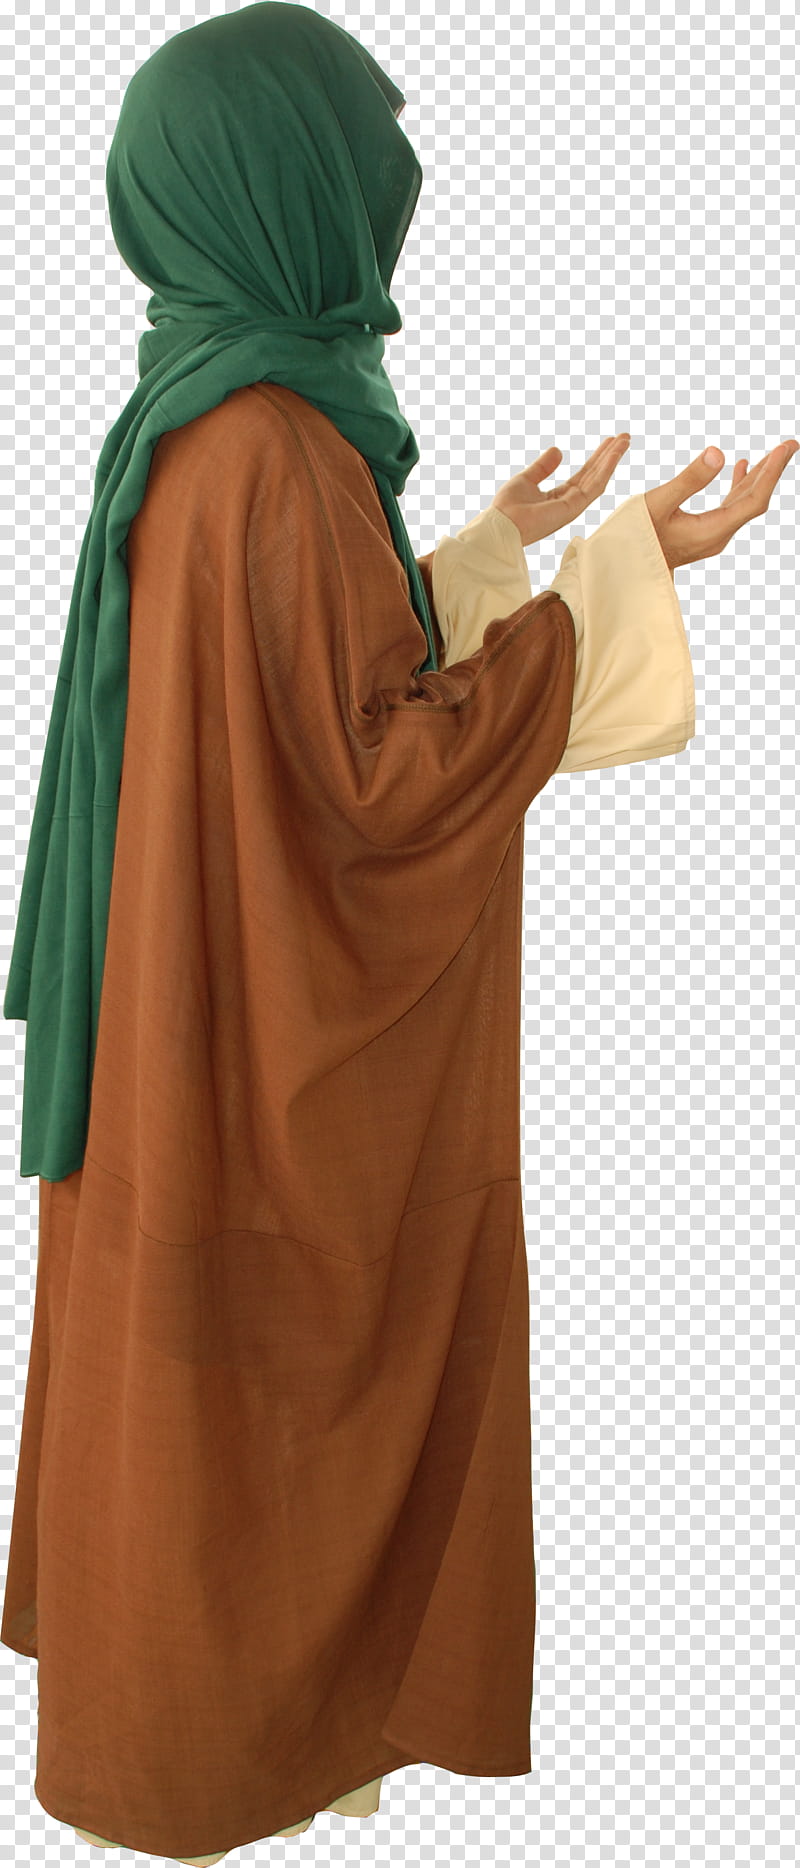 Arab old style clothes , standing person wearing brown dress and green headscarf transparent background PNG clipart